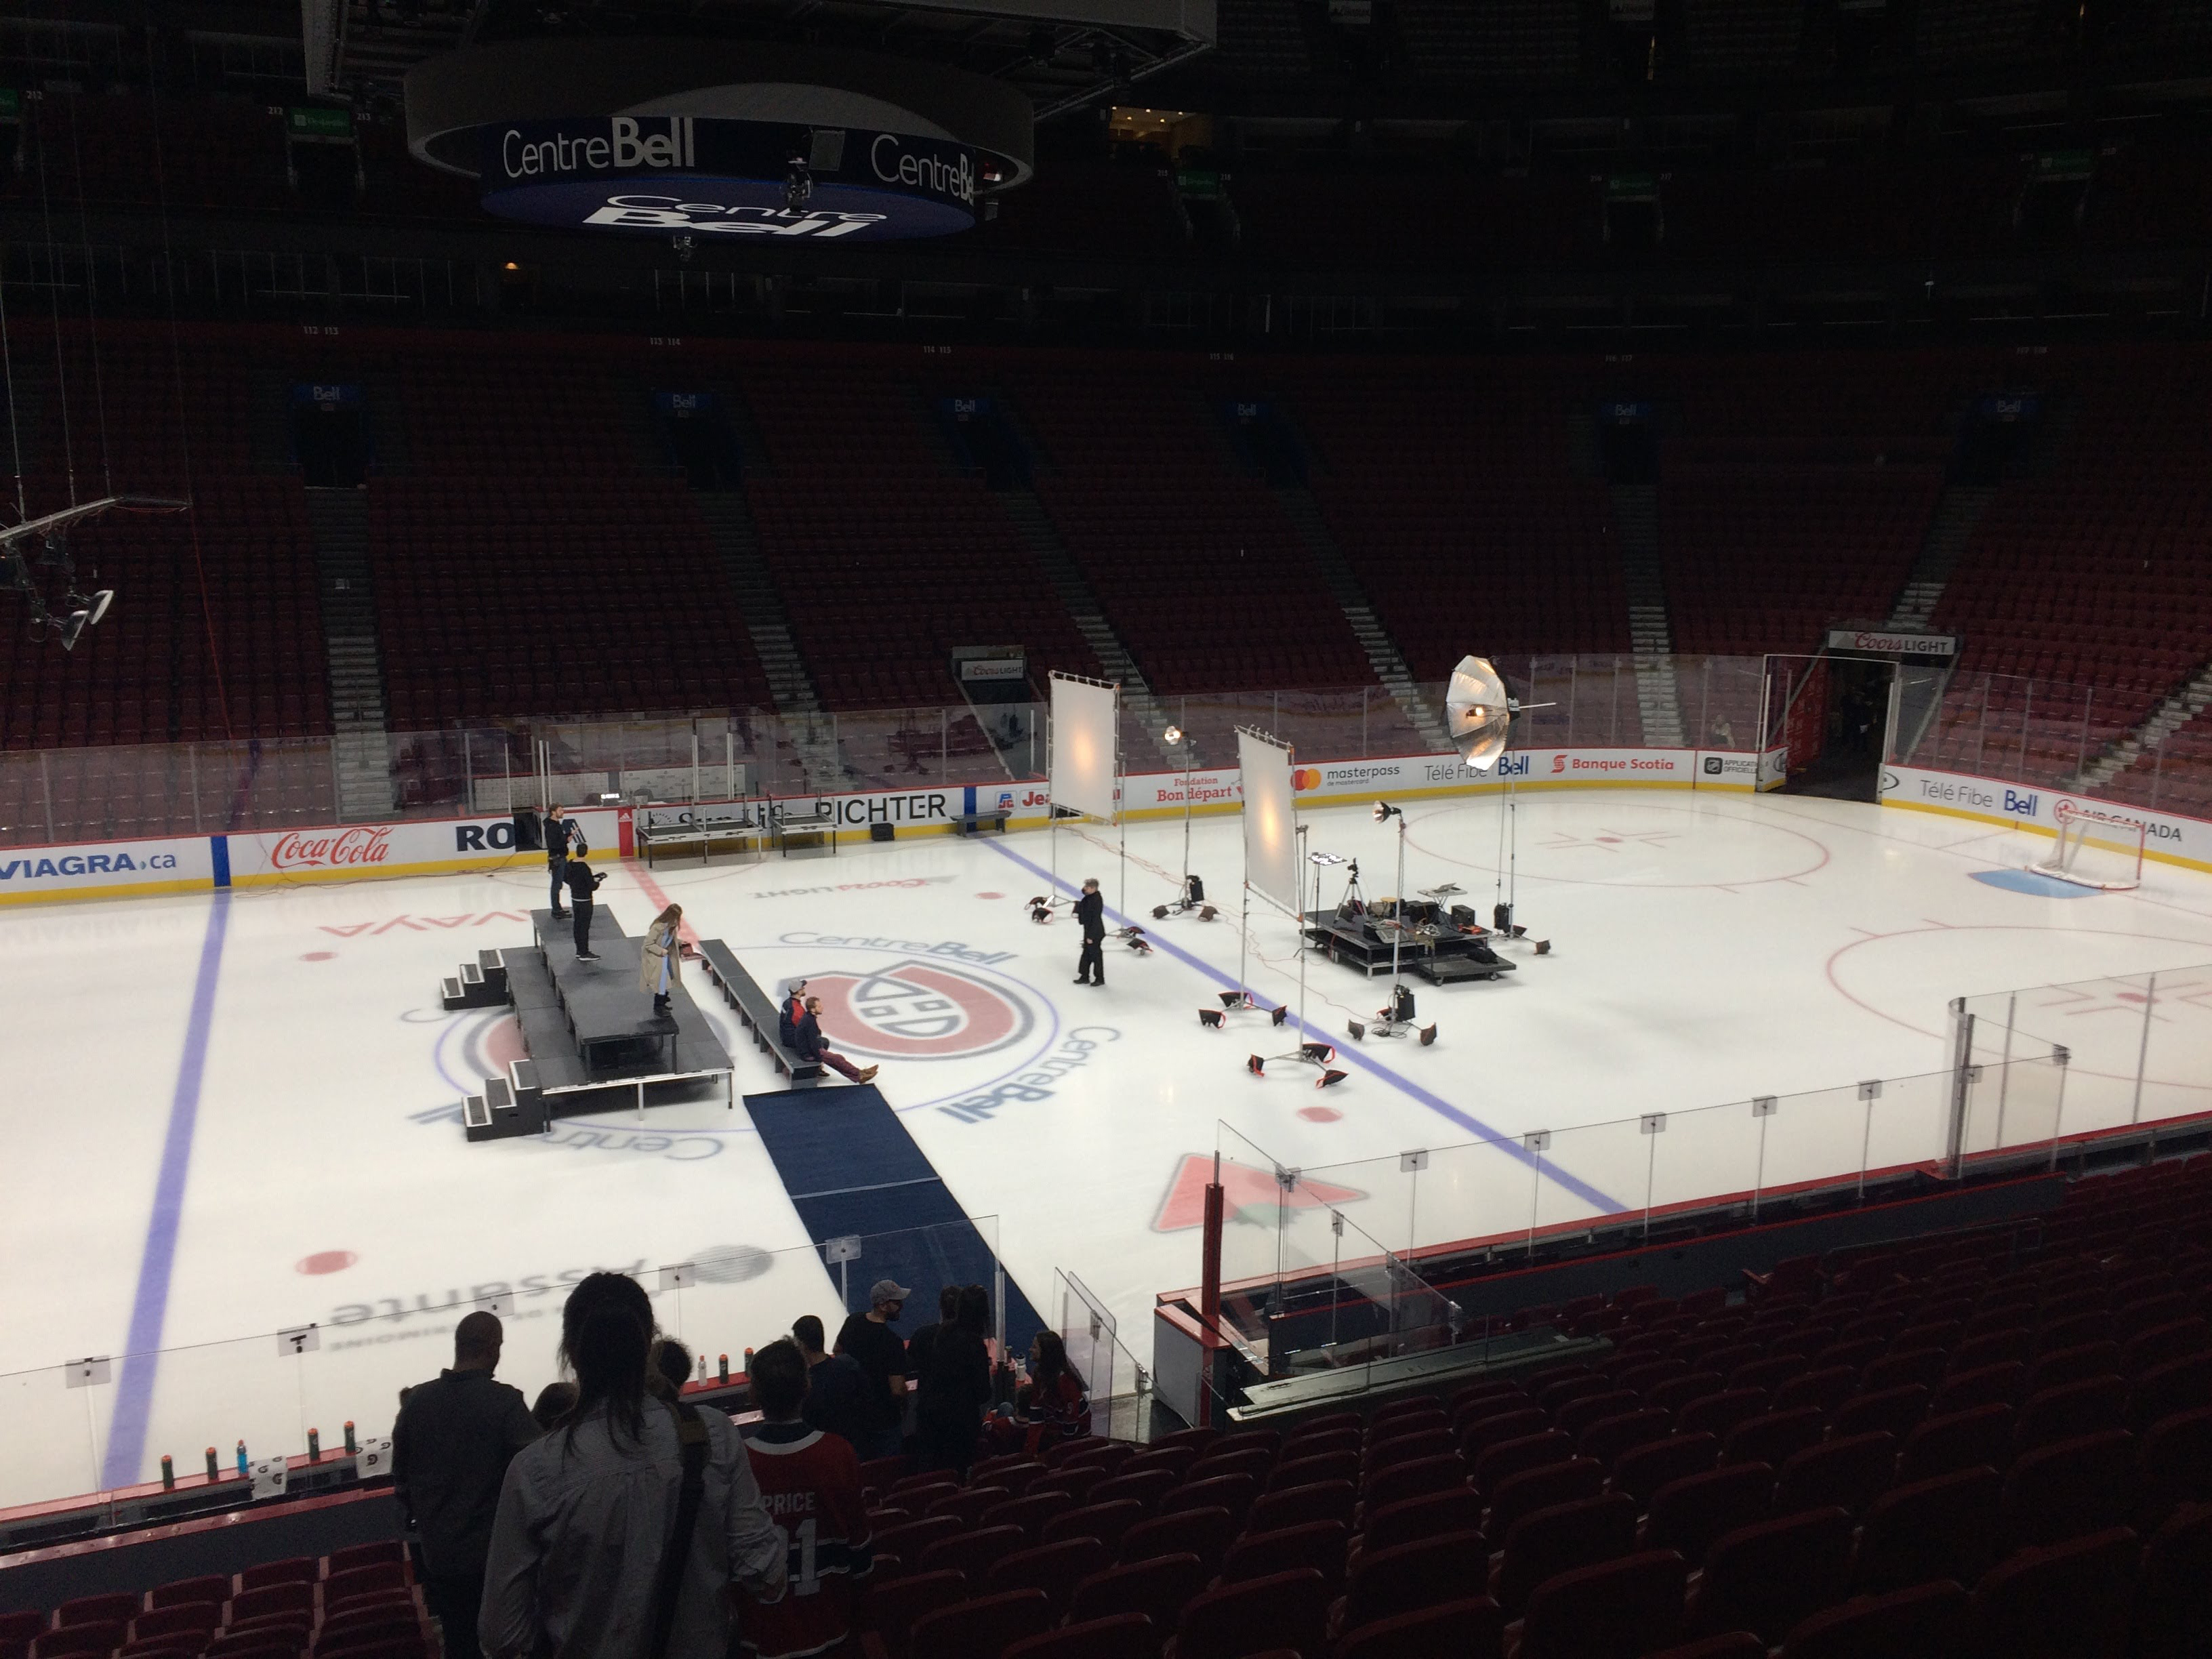 Montreal Bell Center, Montreal Canadiens official photo session